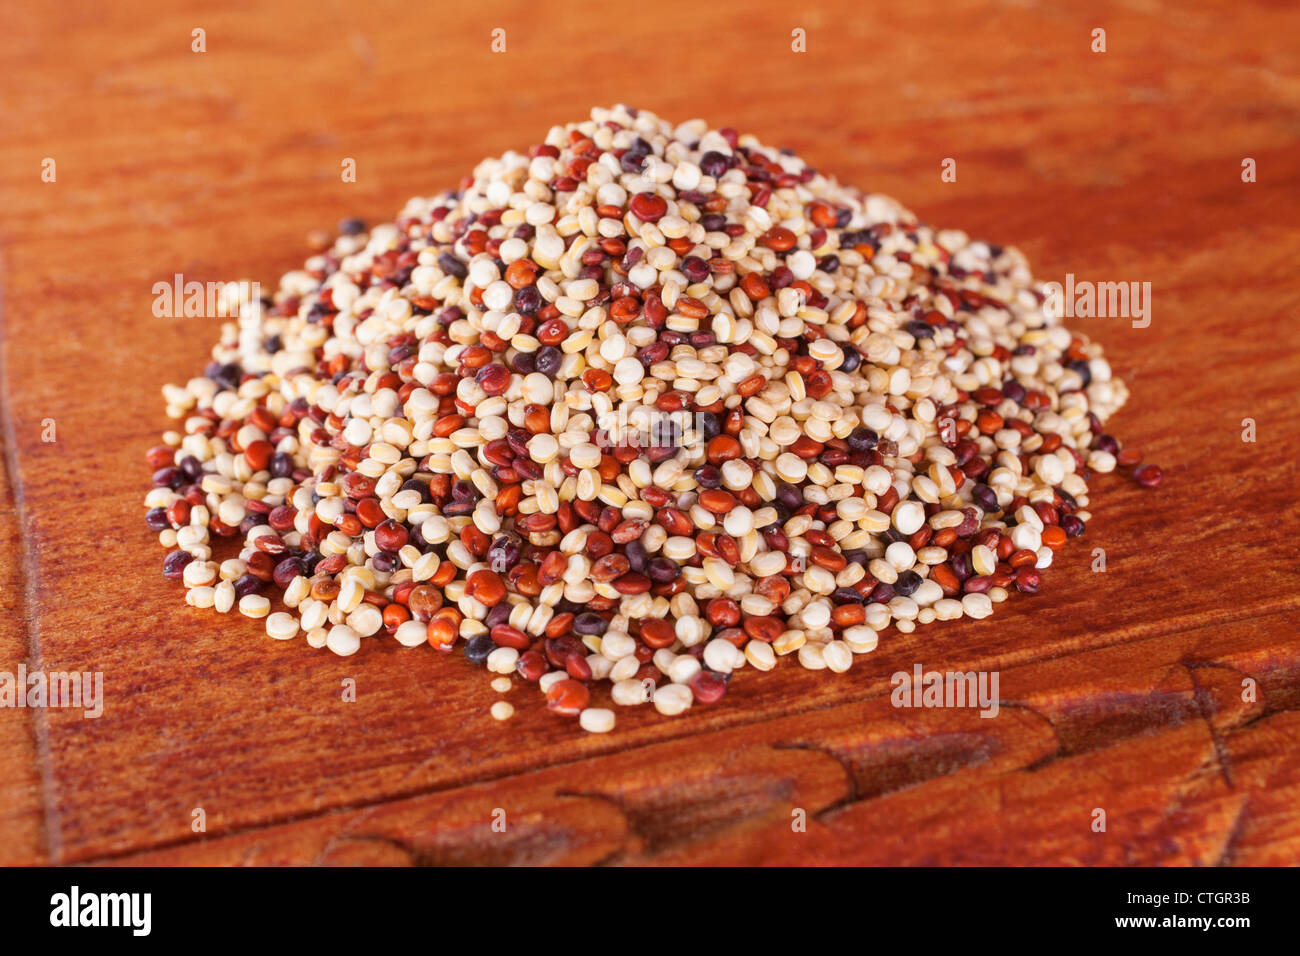 Ancient grains quinoa and amaranth in a pile on a wooden board. Quinoa contains white, red and black grains. Stock Photo